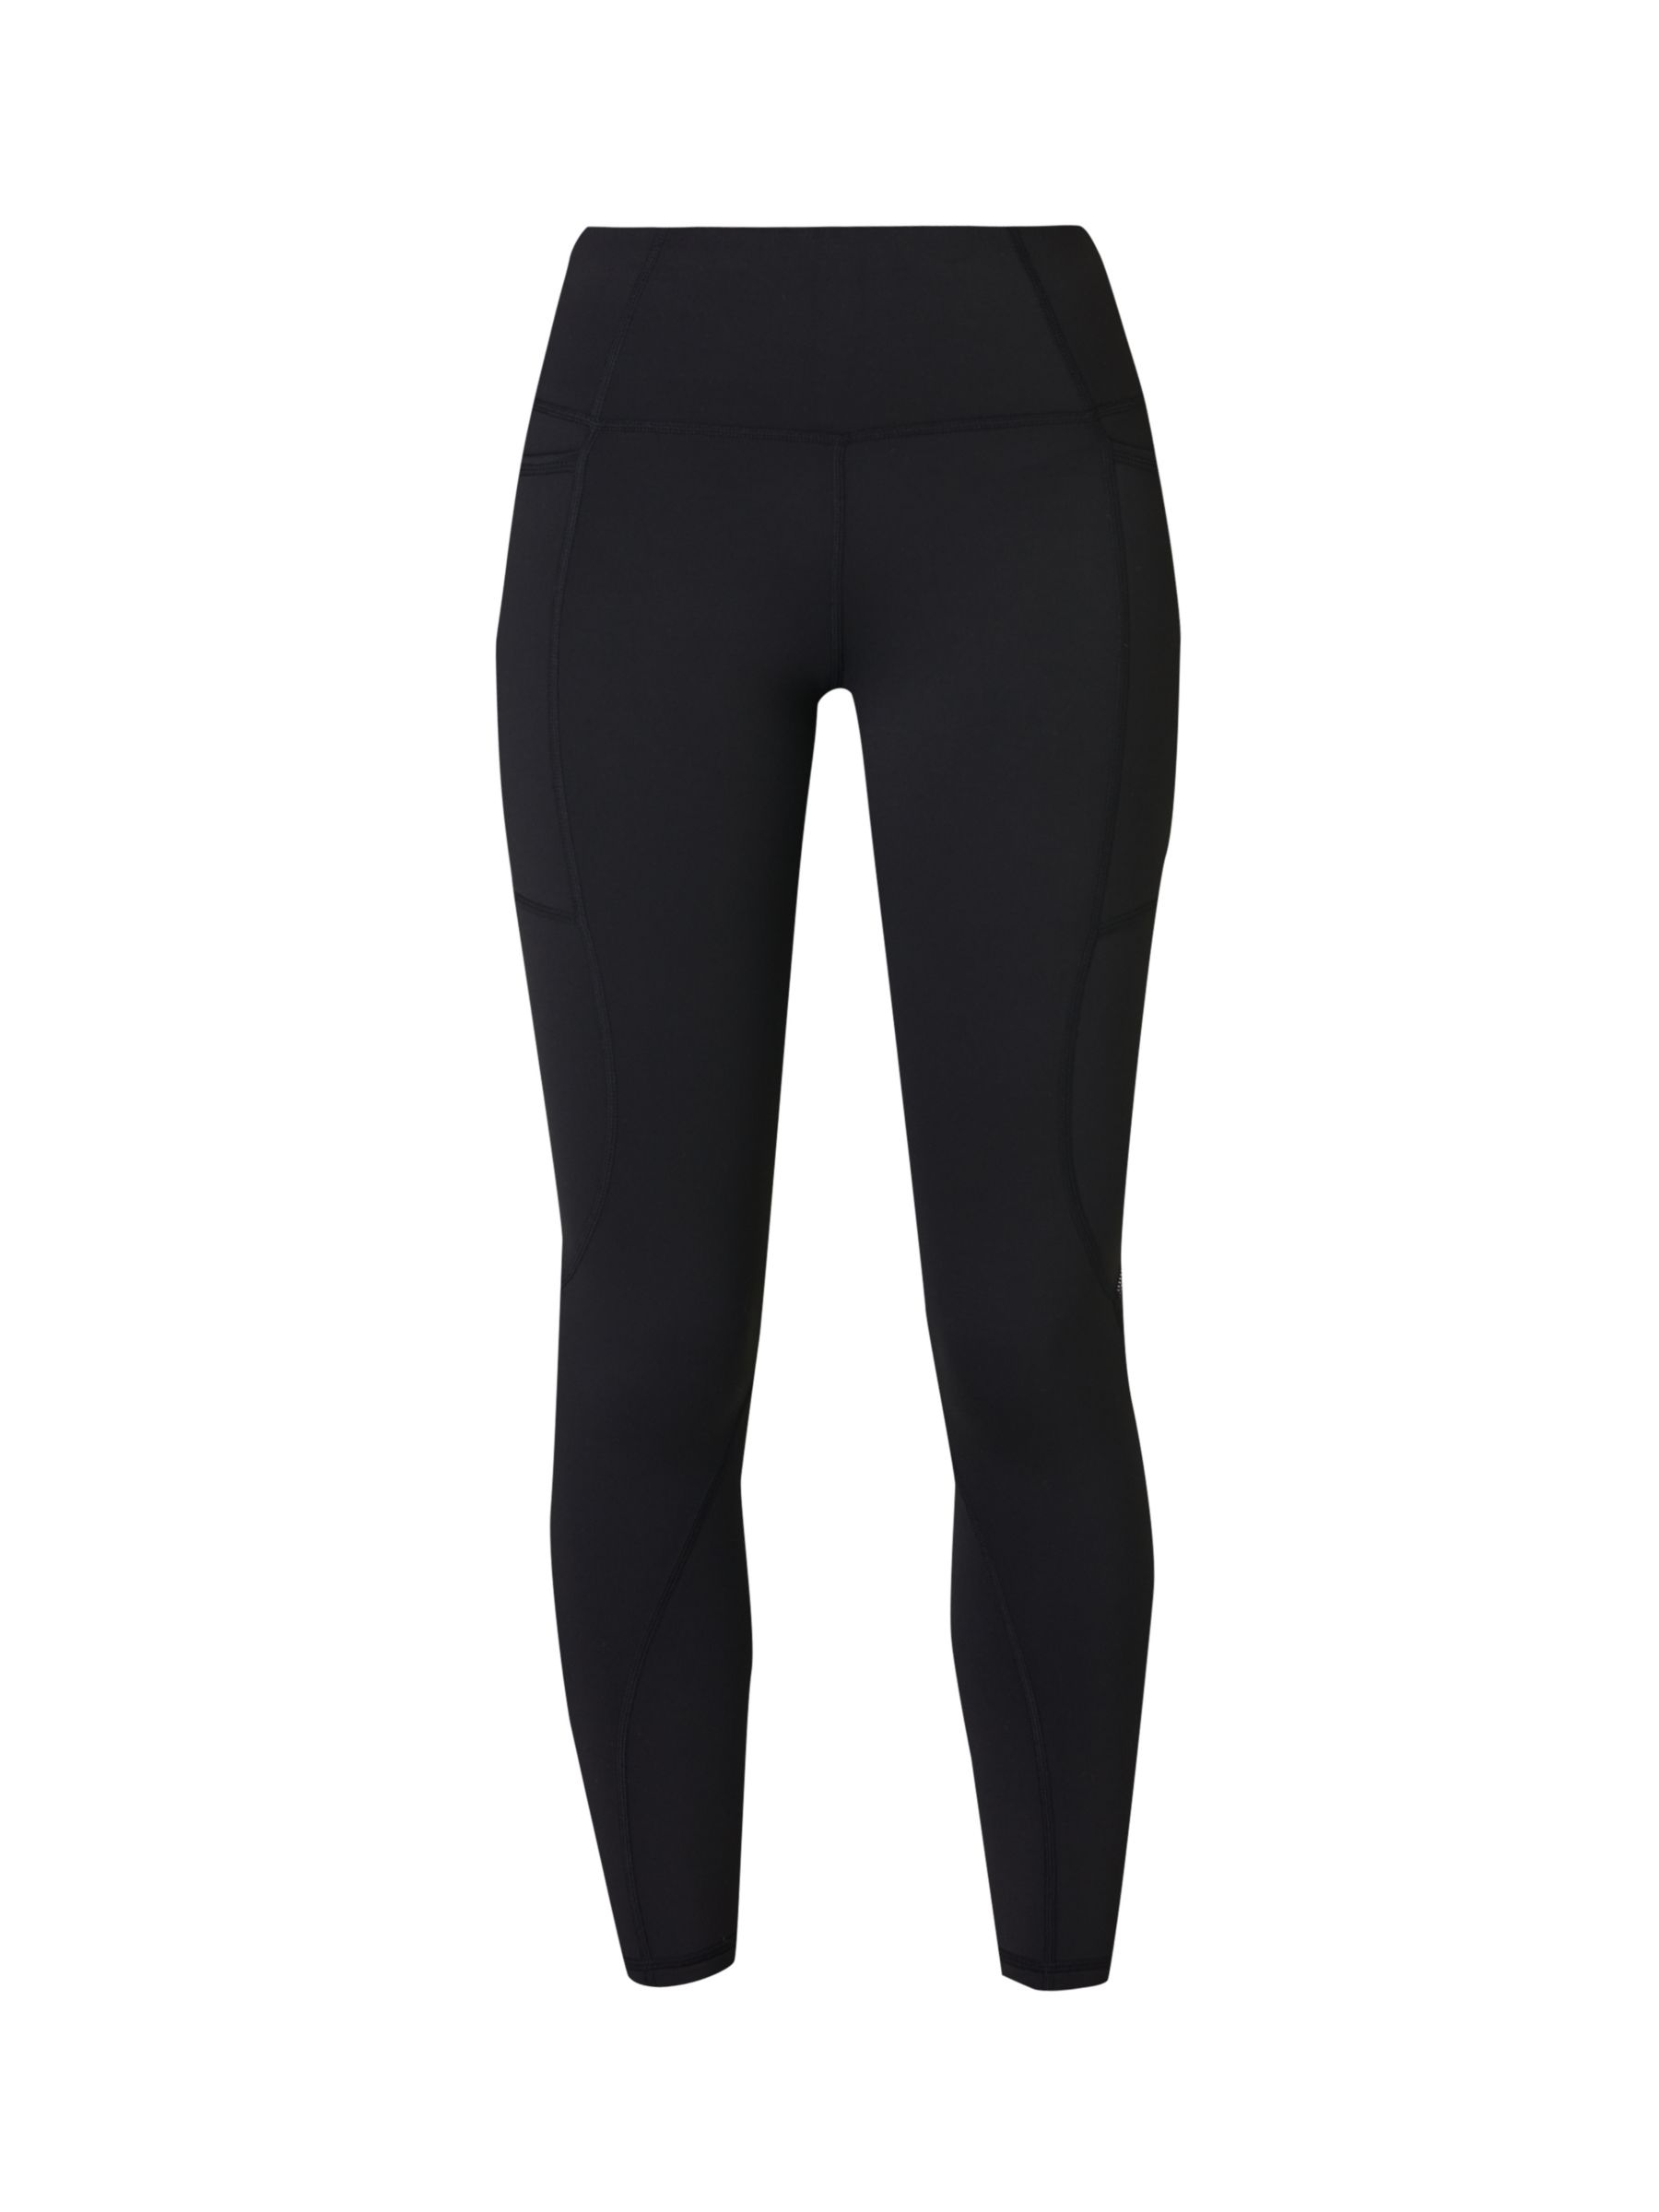 Pockets For Women - Therma Boost 2.0 Running Leggings